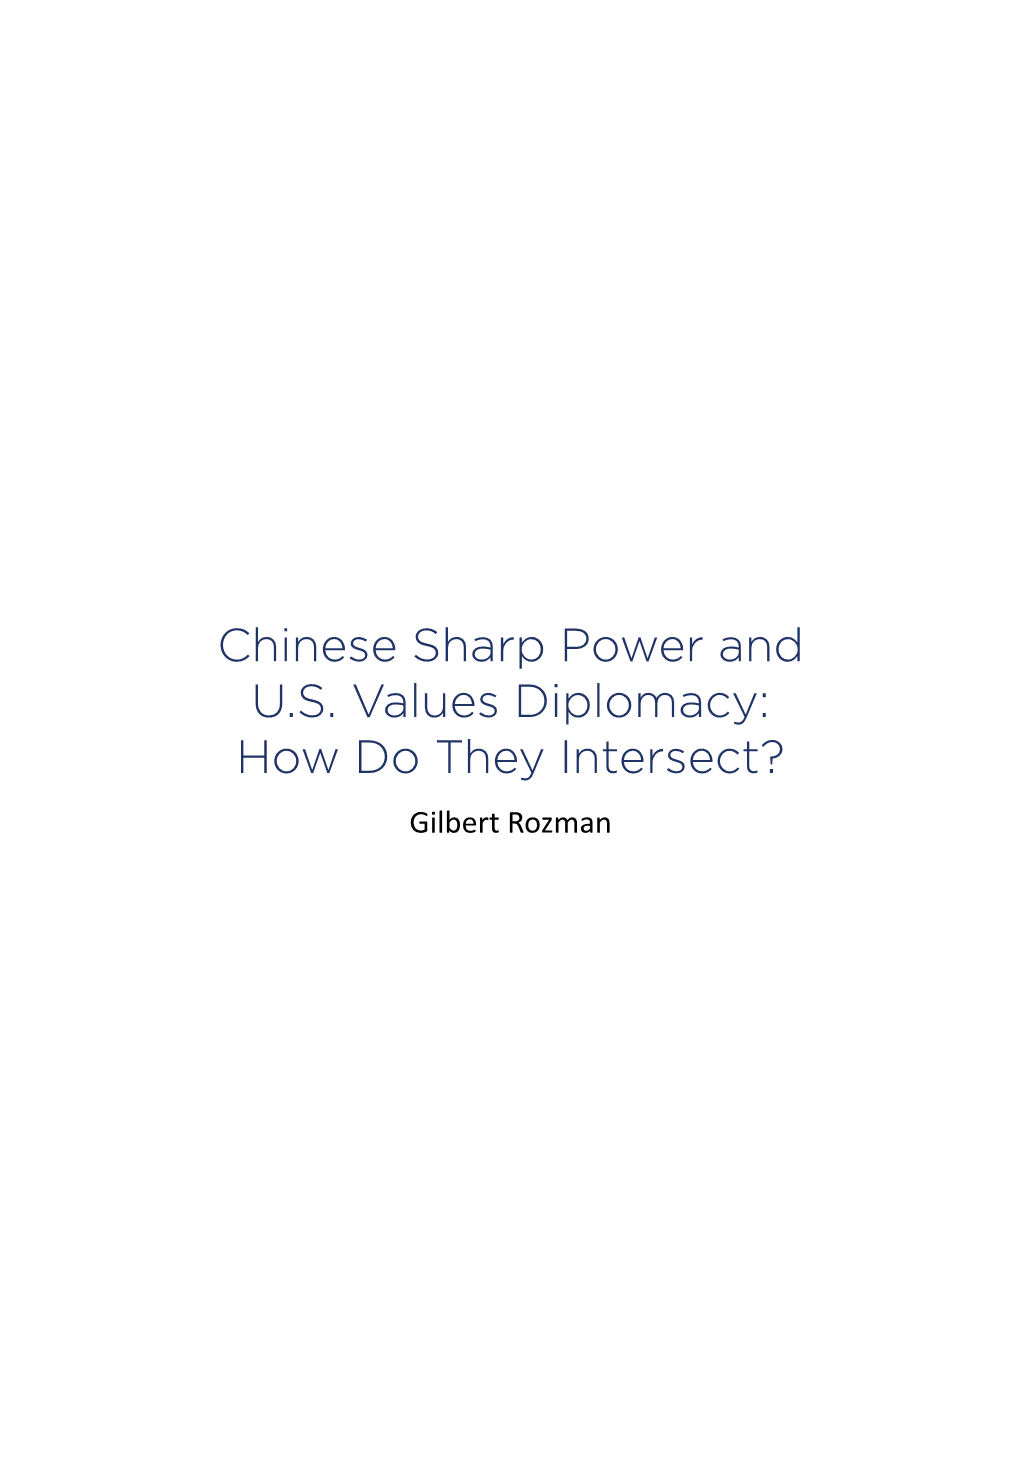 Chinese Sharp Power and US Values Diplomacy